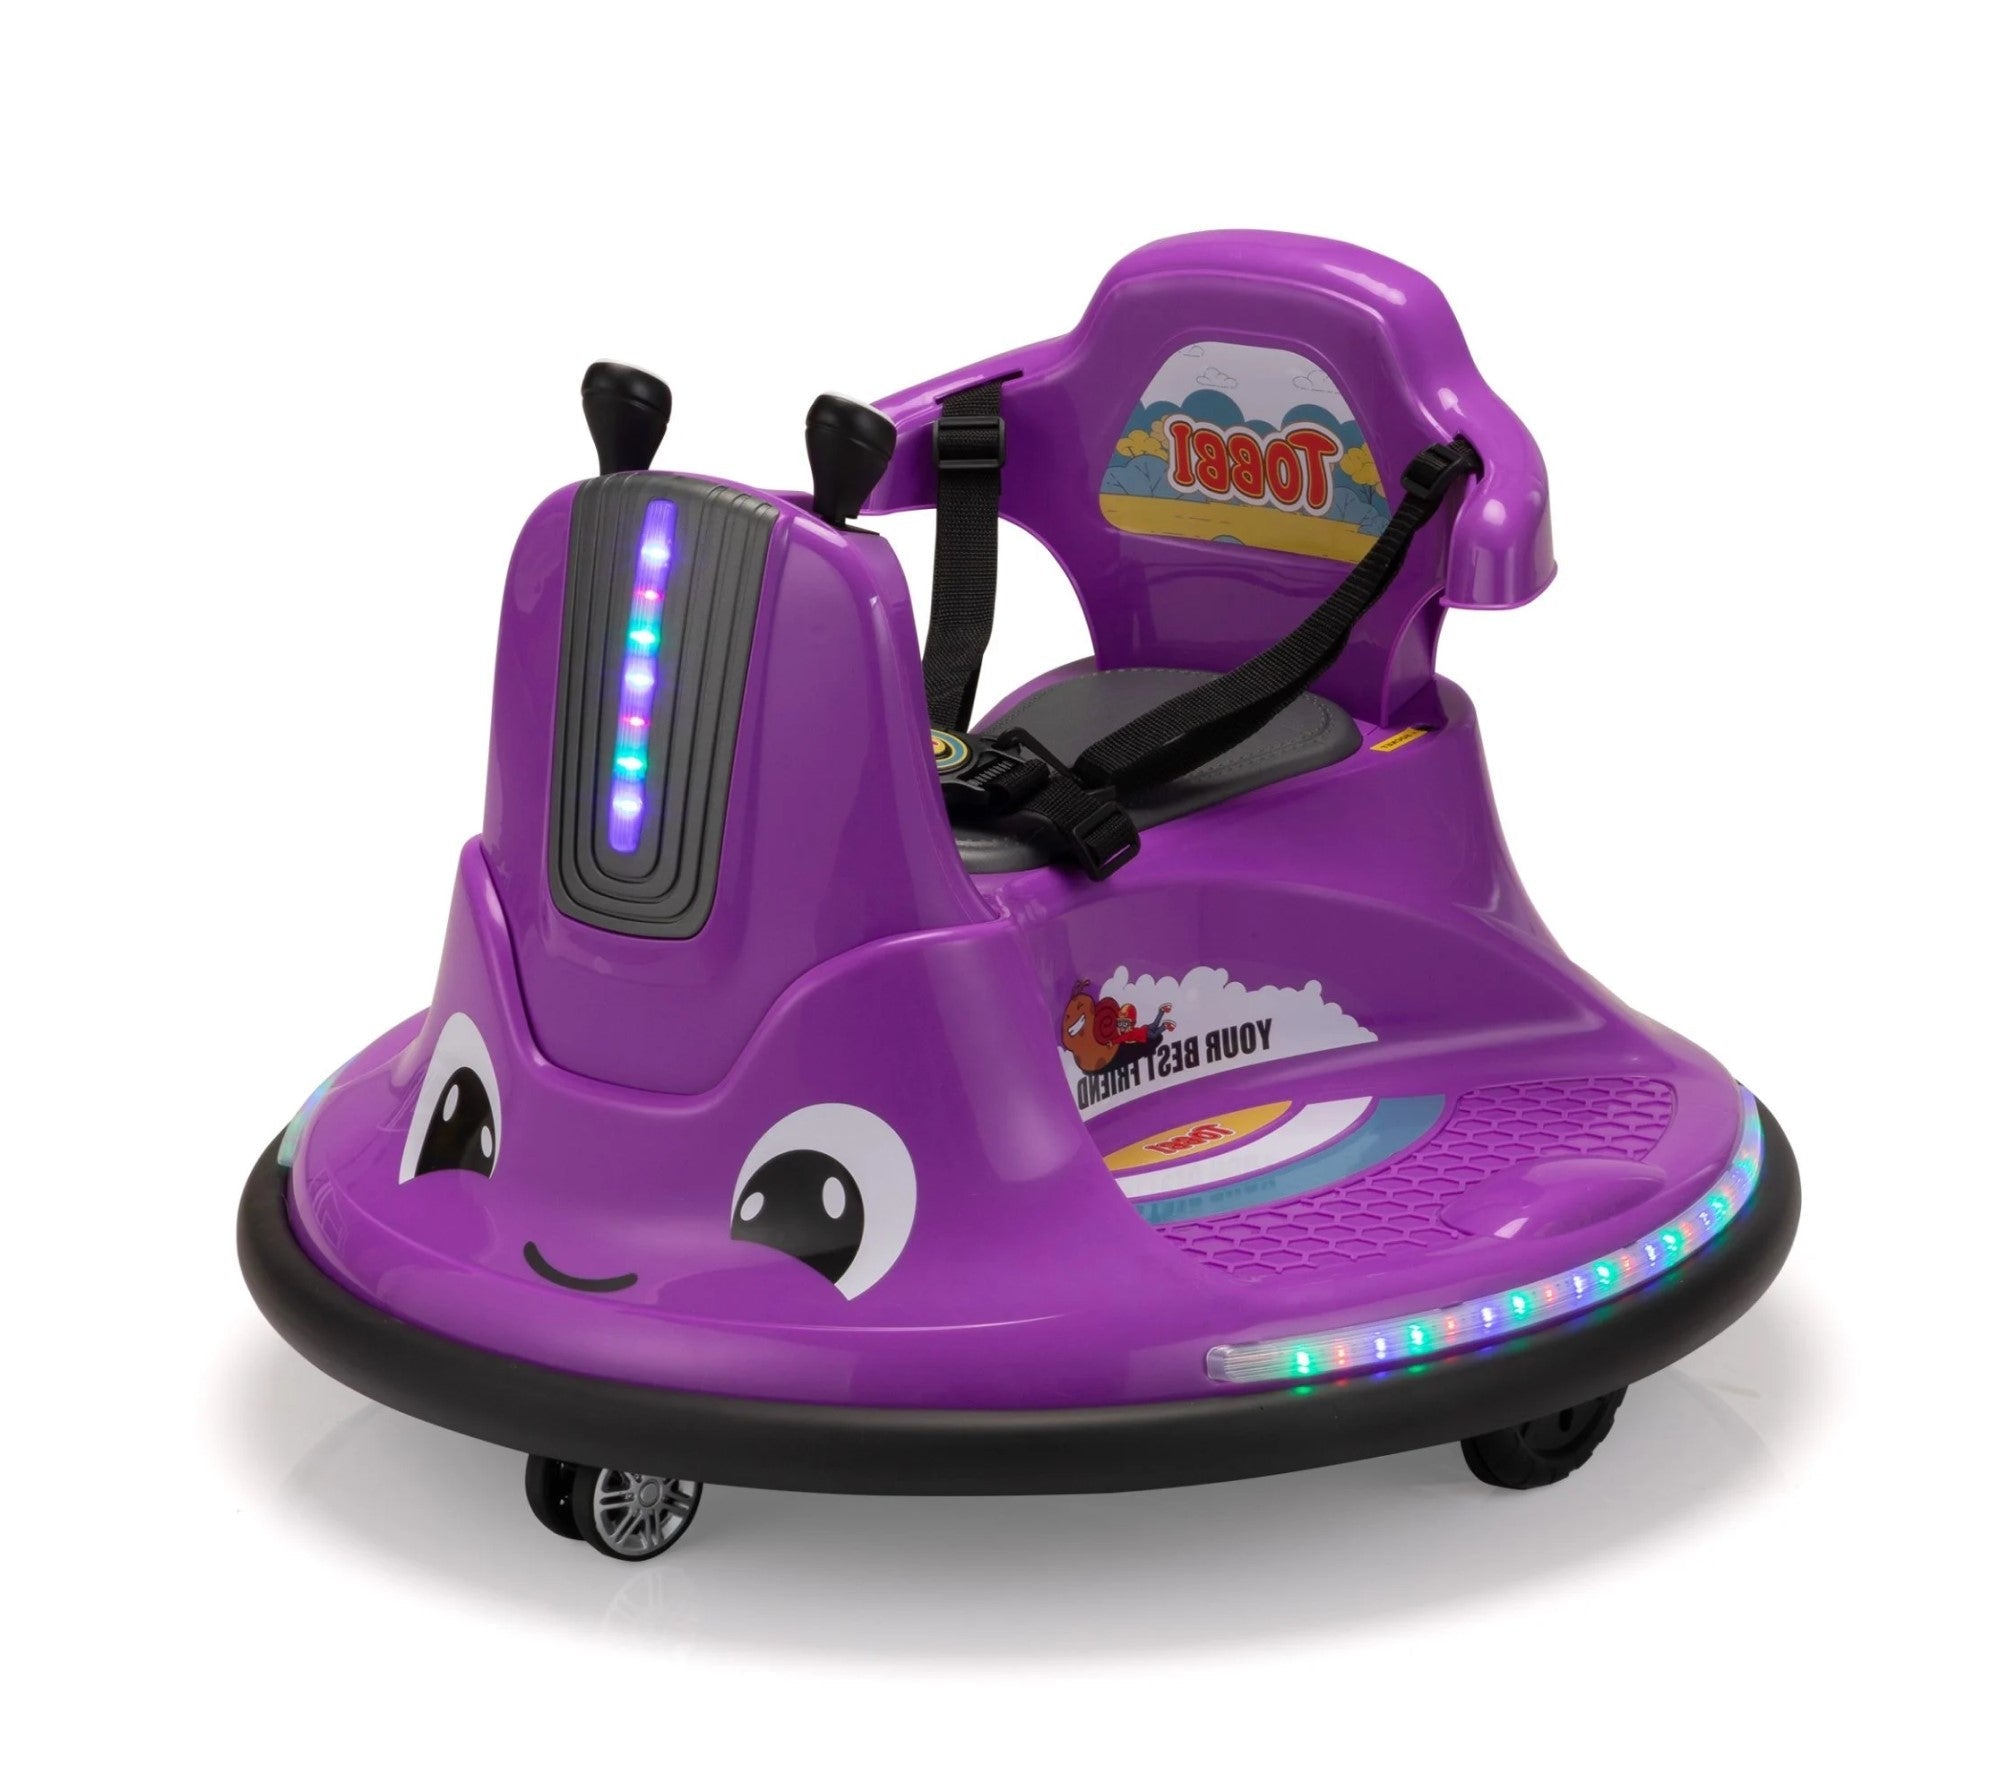 Tobbi 12V Kids Electric Ride On Bumper Car with Remote Control, 360 Degree Spin - Toys Ride on, Toys Ride Bumper Car, Purple